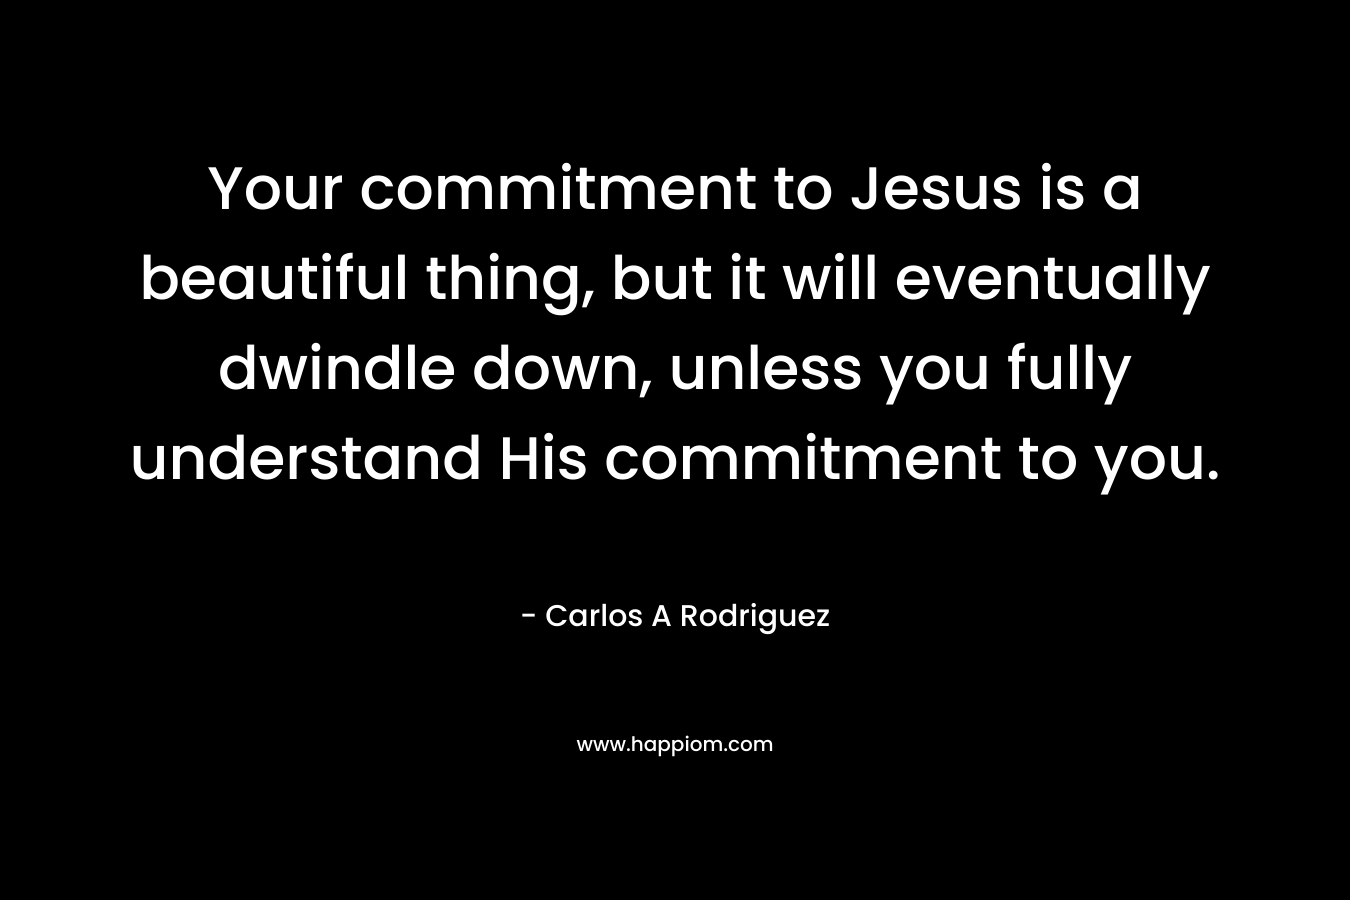 Your commitment to Jesus is a beautiful thing, but it will eventually dwindle down, unless you fully understand His commitment to you. – Carlos A  Rodriguez